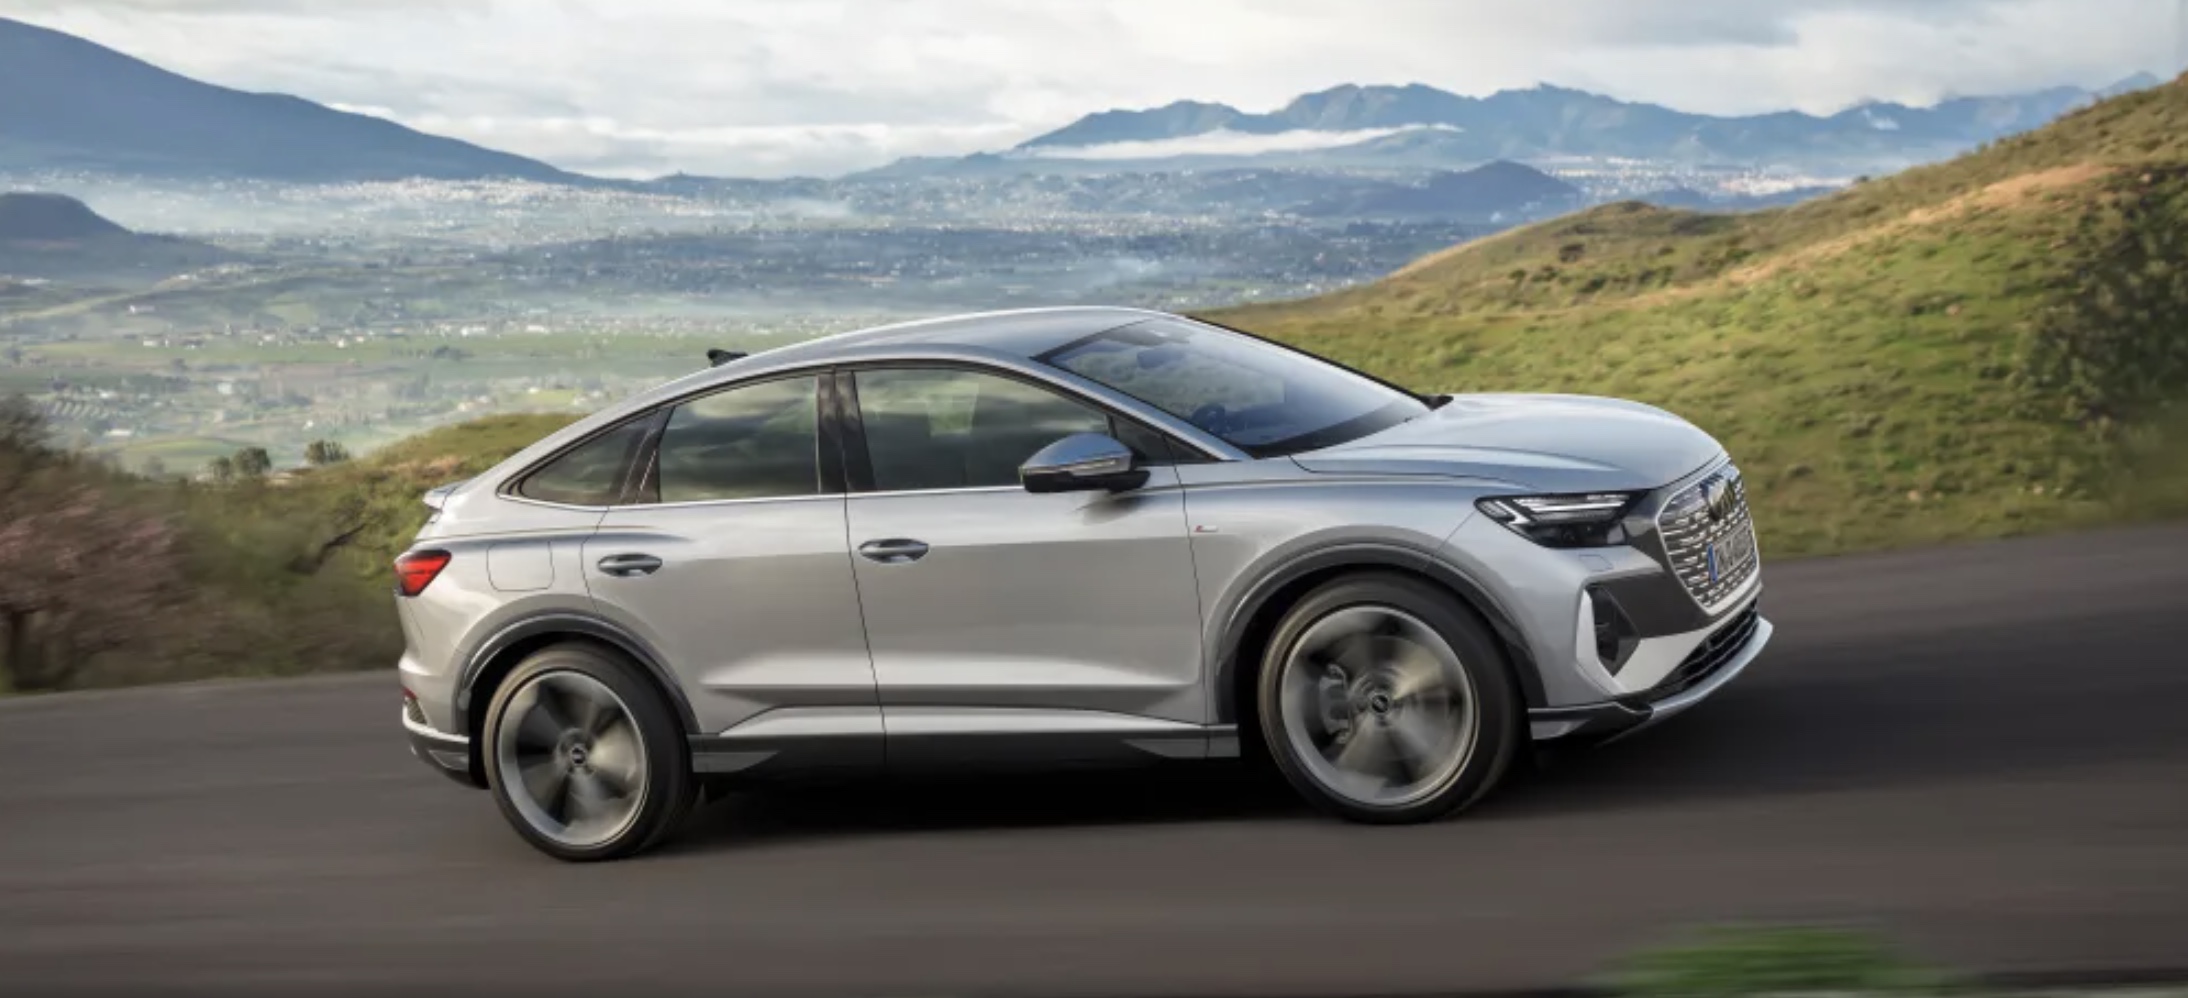 Audi launches Q4 e-tron electric SUV starting at just $36,400